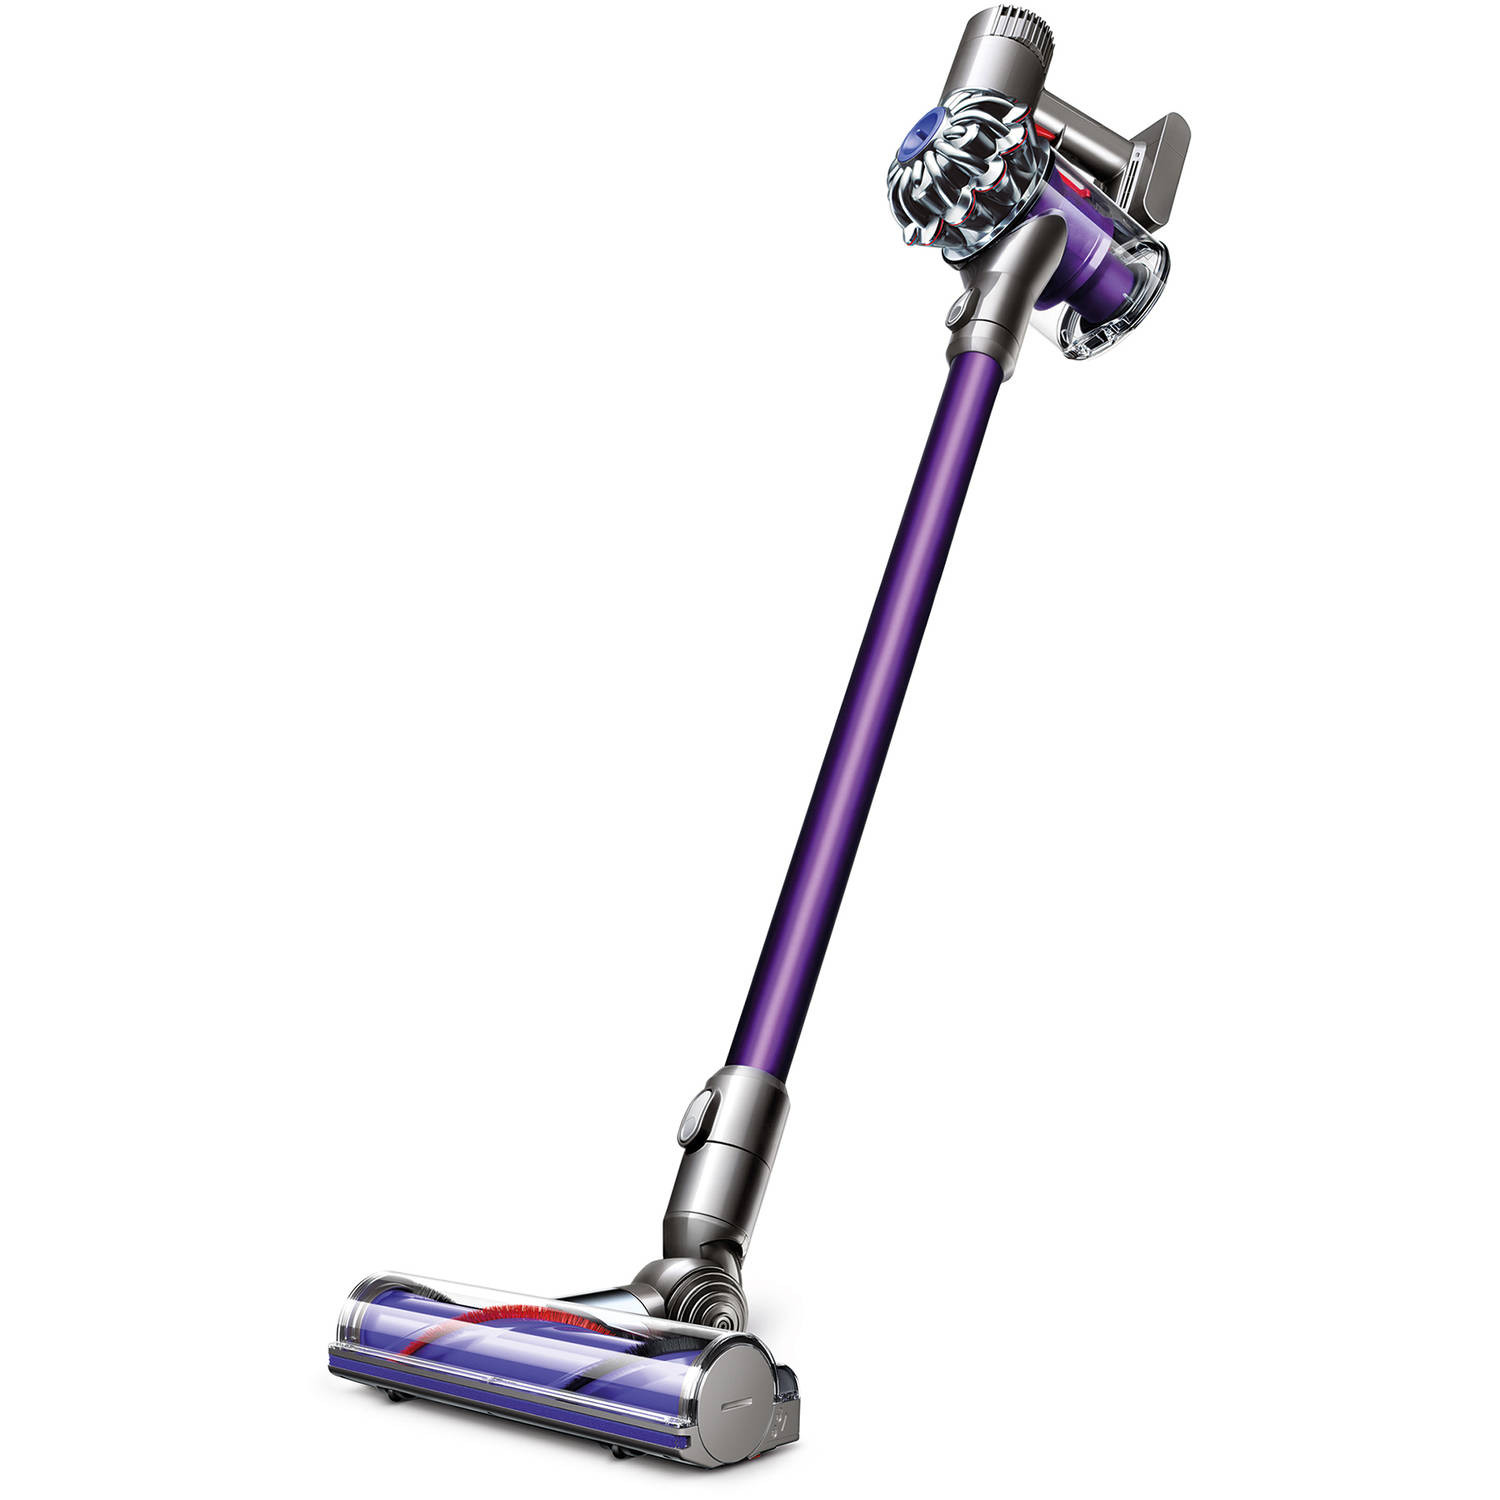 16 Fabulous Best Vacuum for Pet Hair and Hardwood Floors 2016 2024 free download best vacuum for pet hair and hardwood floors 2016 of how to find the best vacuum walmart com with regard to ee4d8cca 6820 4868 a8ed cedb073a82c2 1 3917cc6946951361459dd9d3a6dbe061